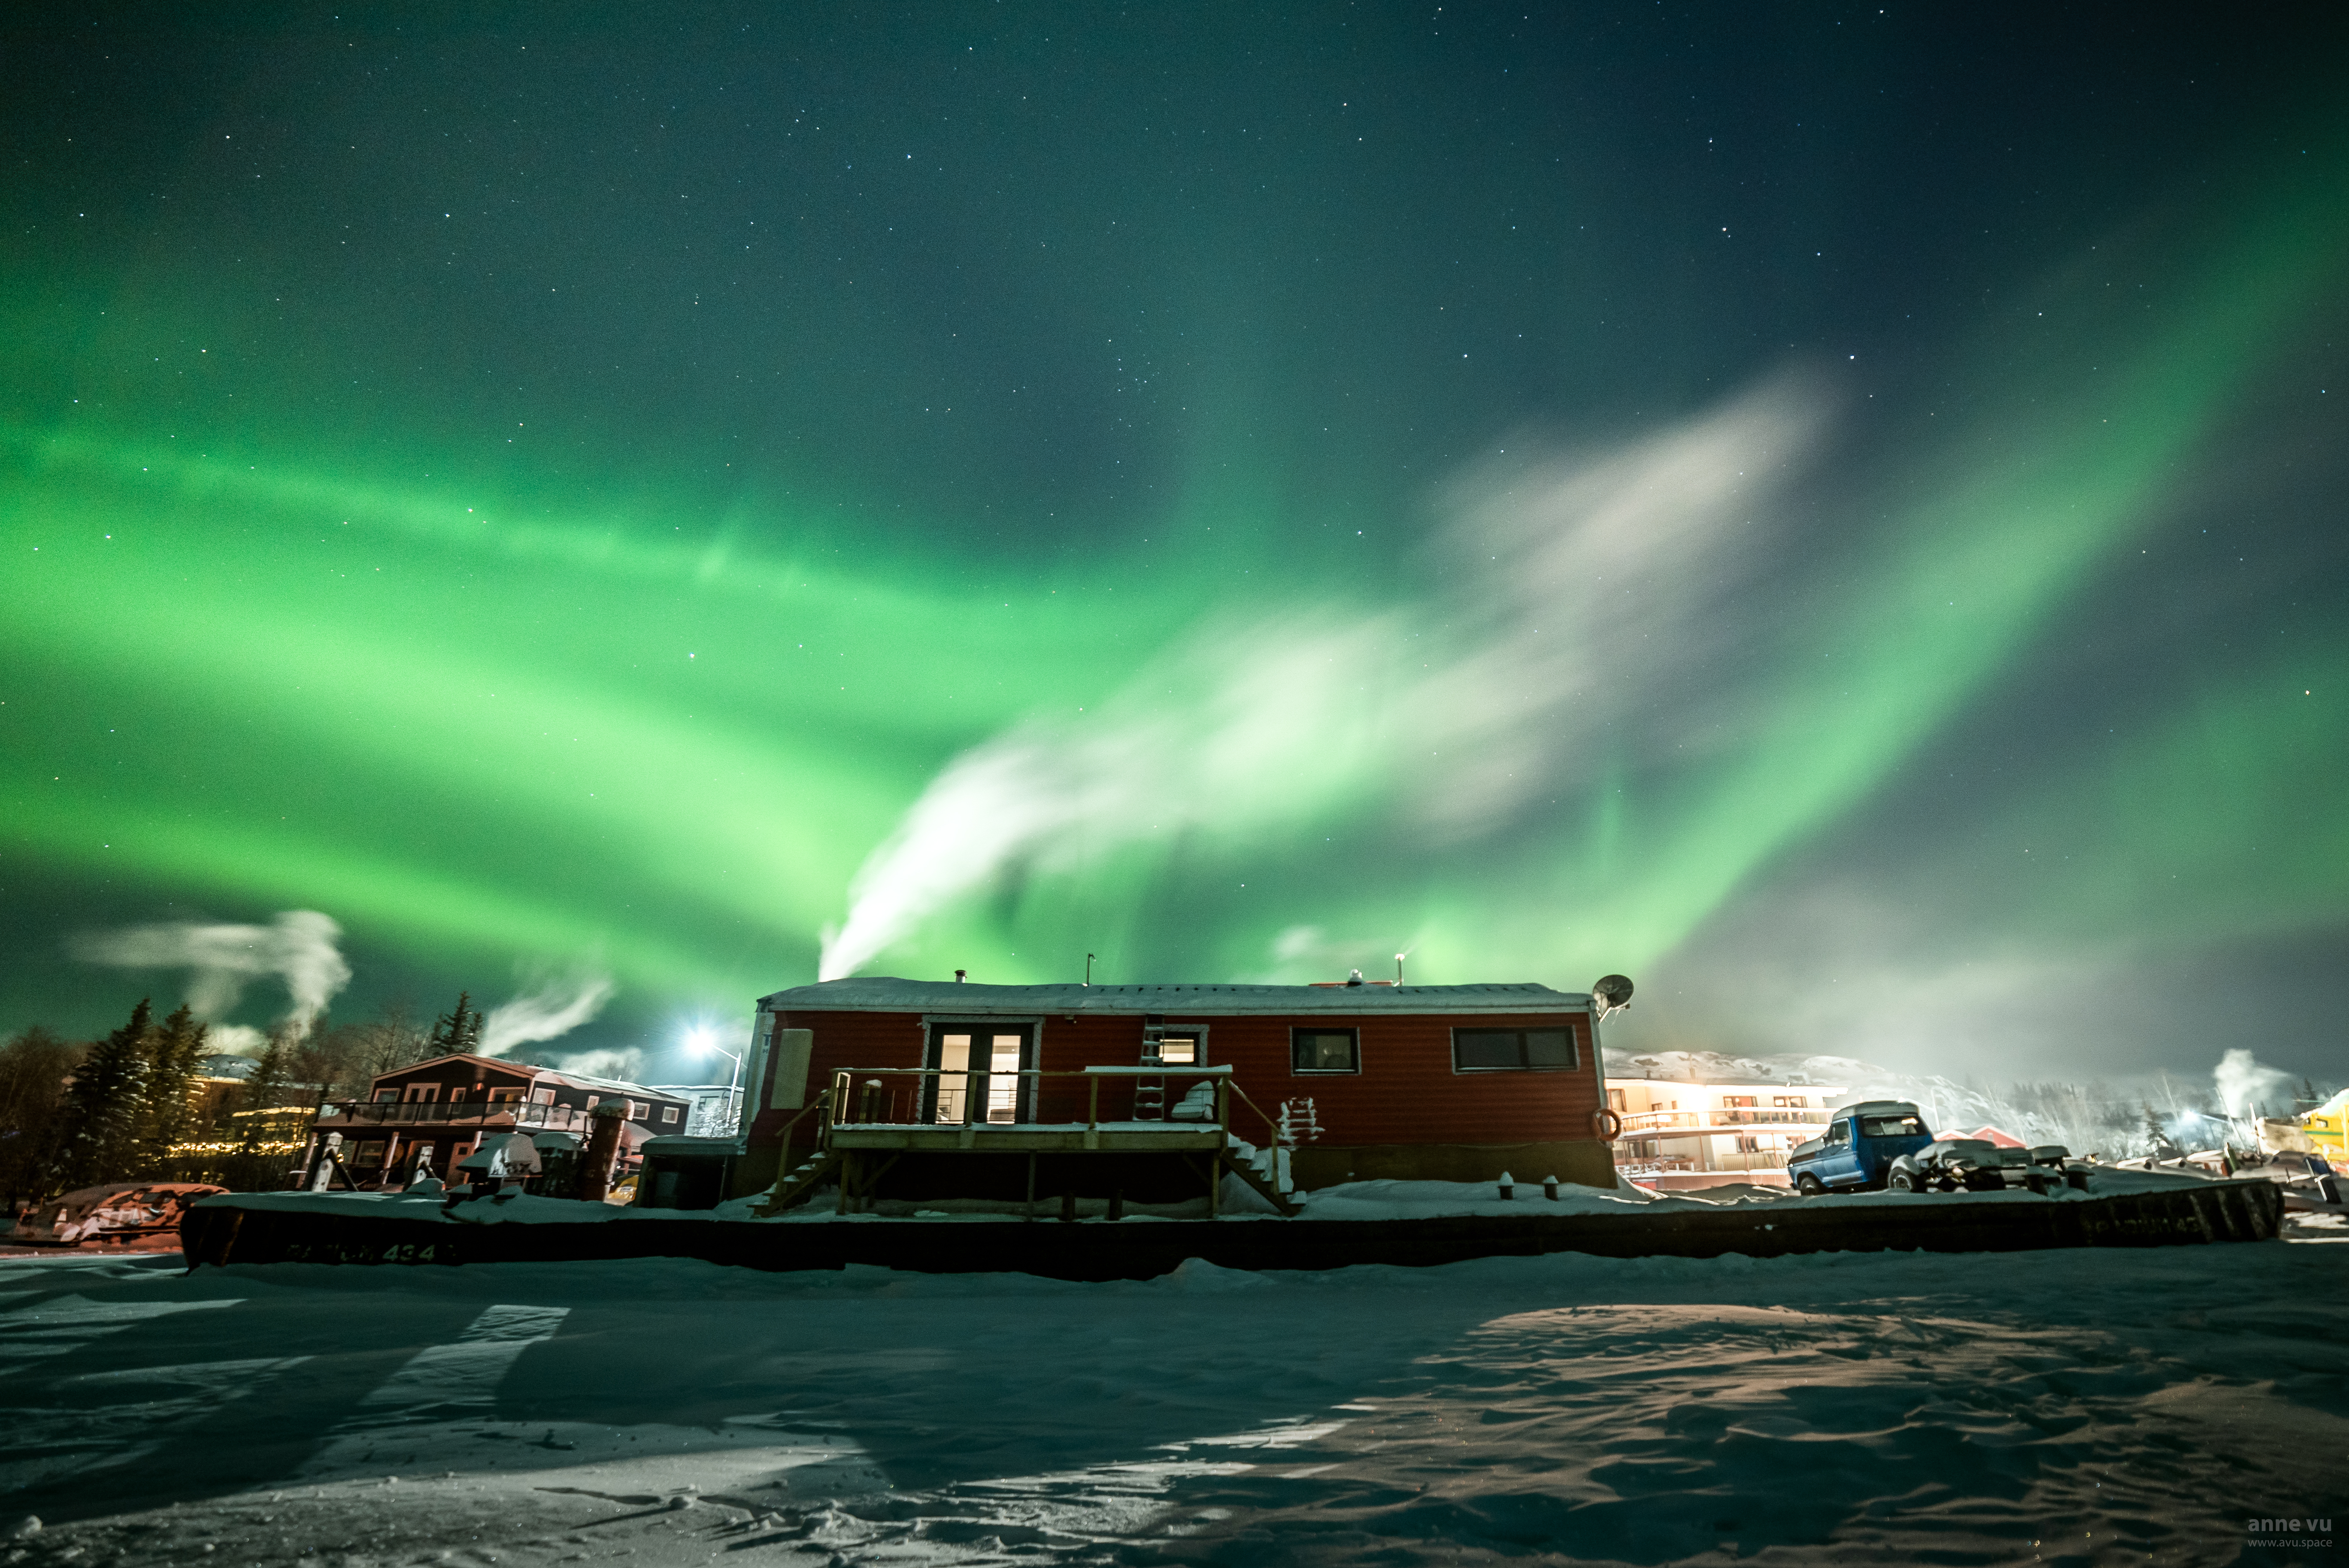 a docked houseboat at night with the northern lights above it.